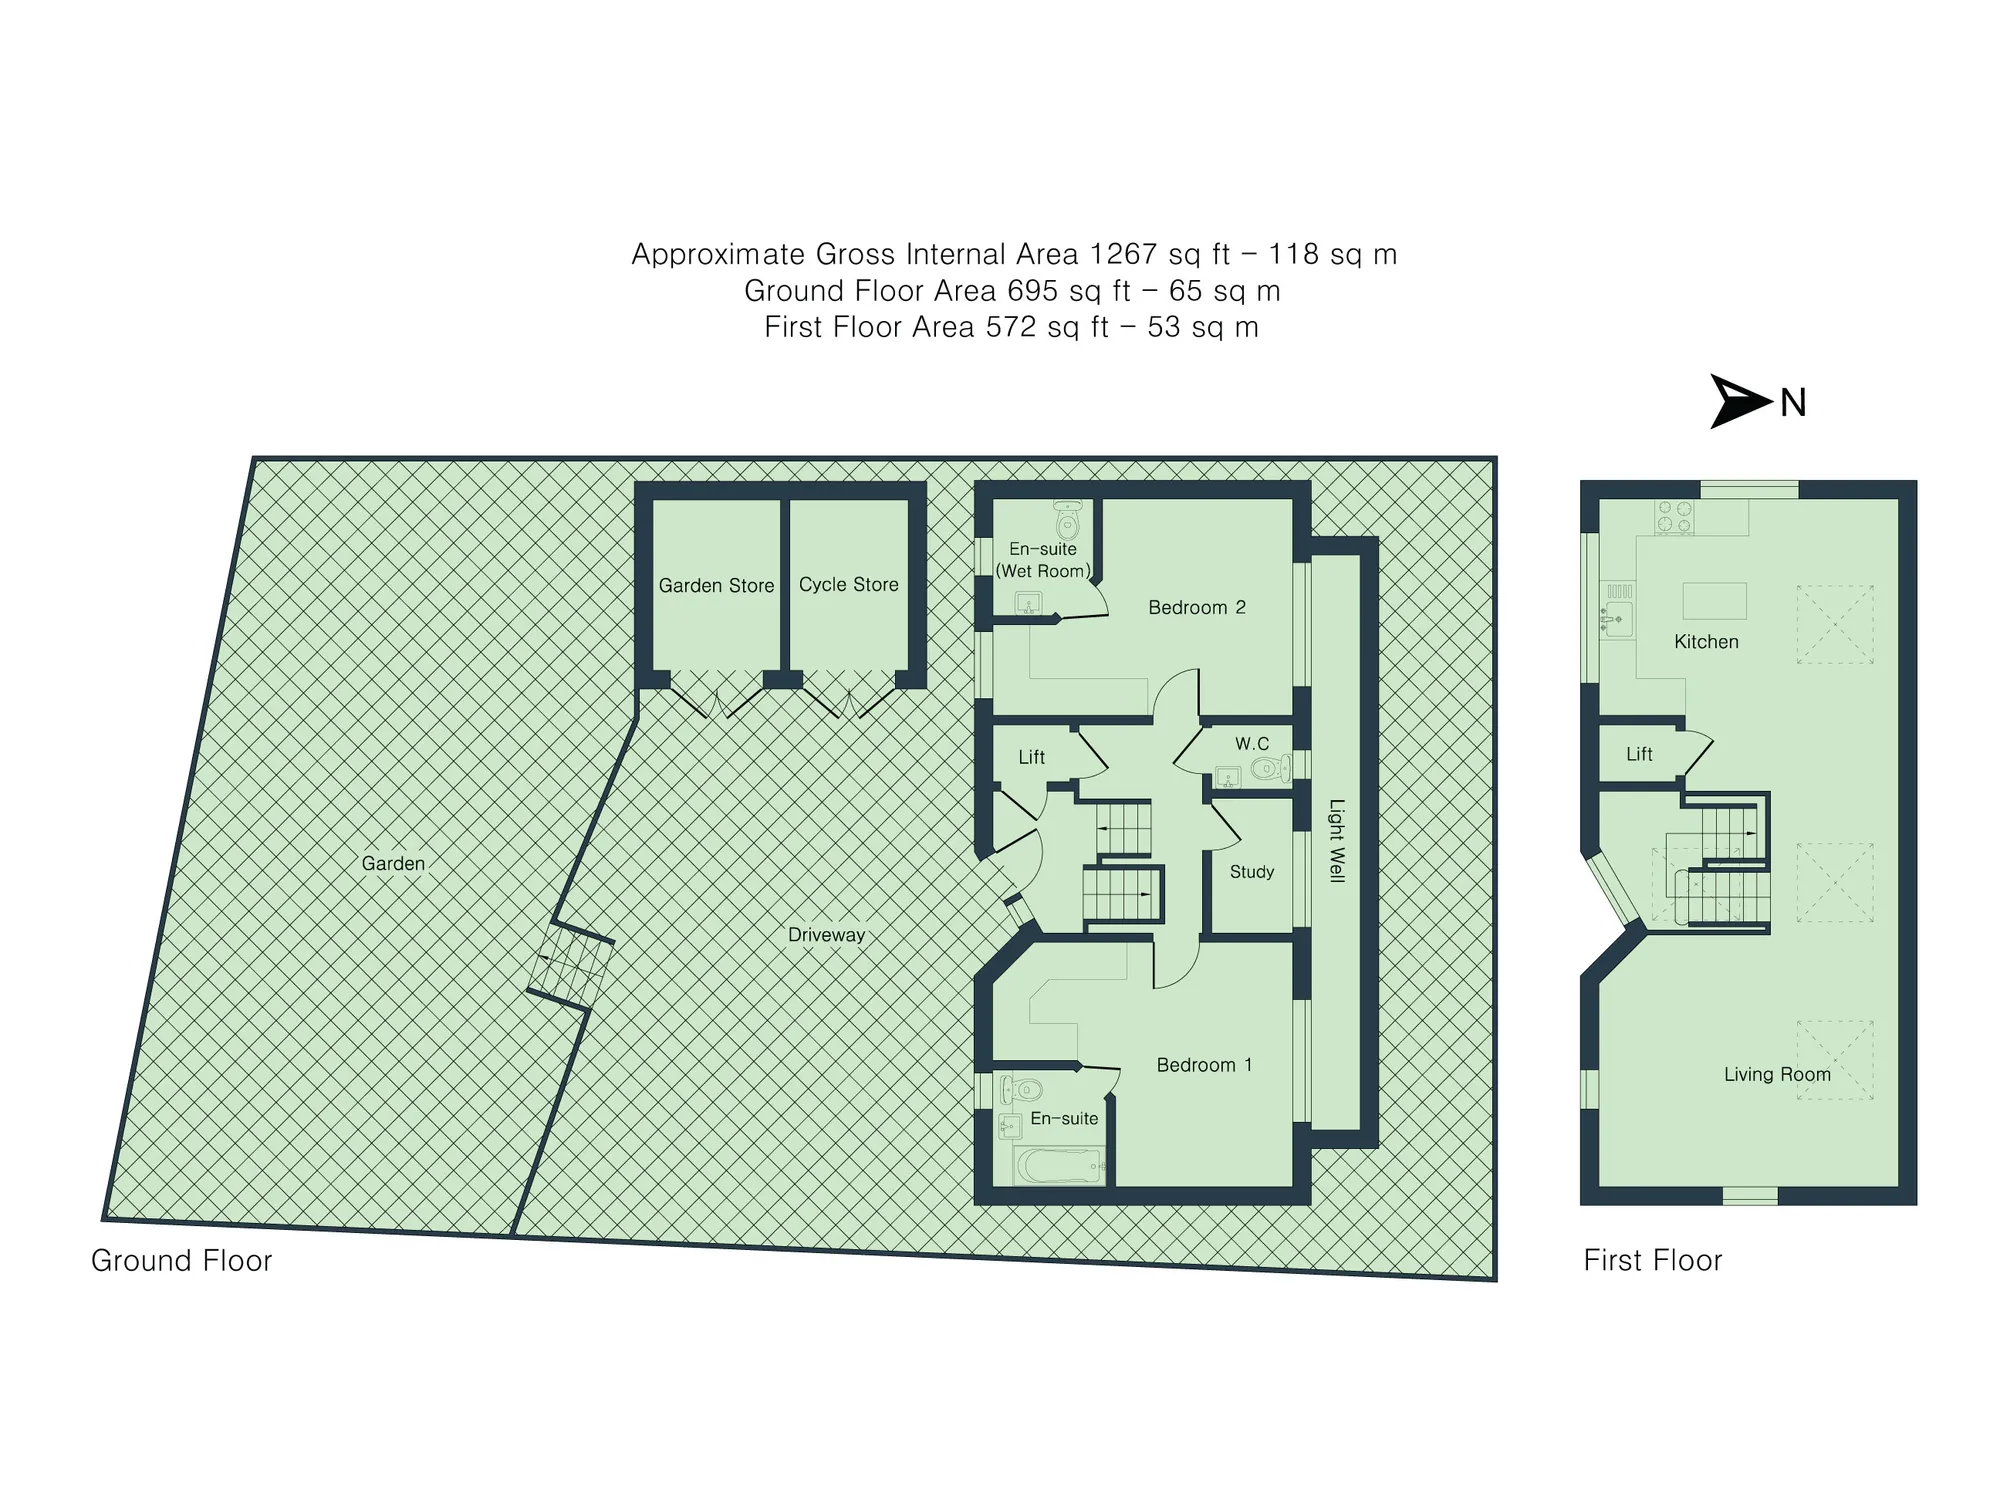 2 bed land for sale in Wheatley Road, Oxford - Property floorplan